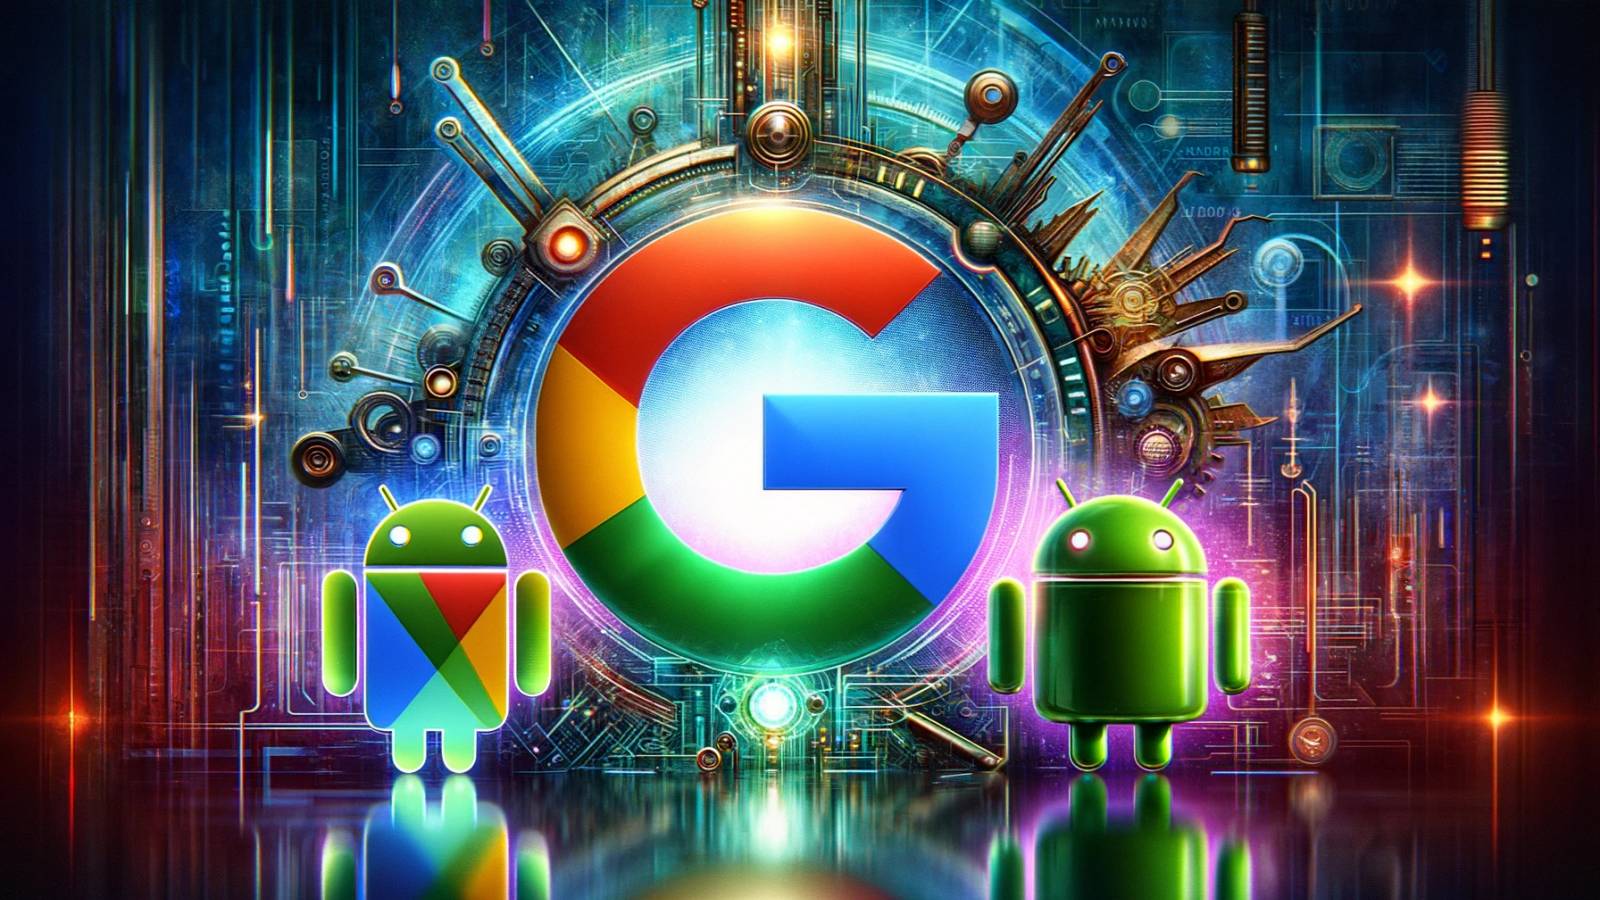 Google Ad Extremt oroande Android iOS Windows-problem